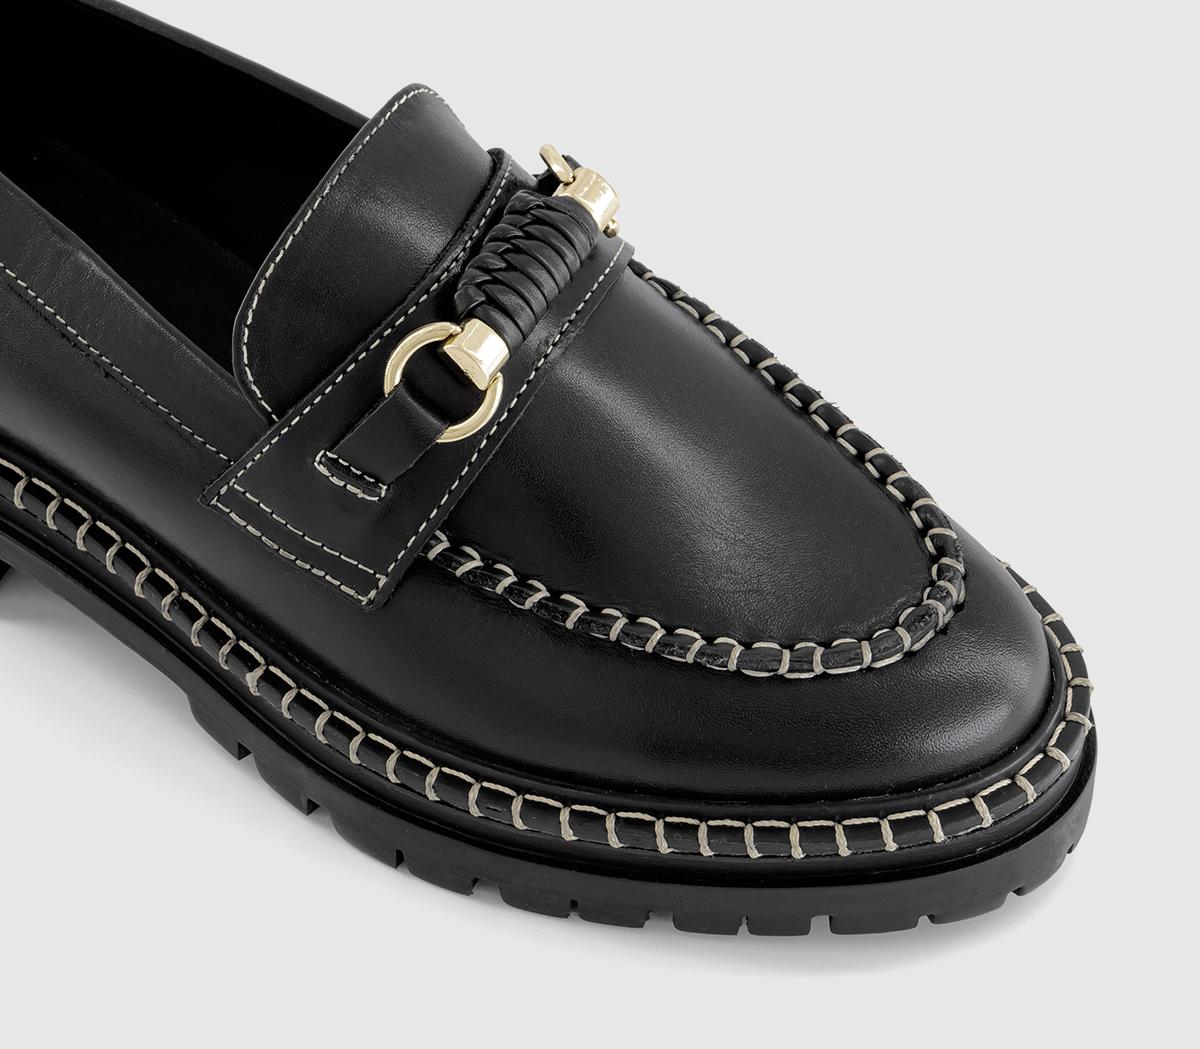 OFFICE Finchly Contrast Stitch Loafers Black Leather - Flat Shoes for Women